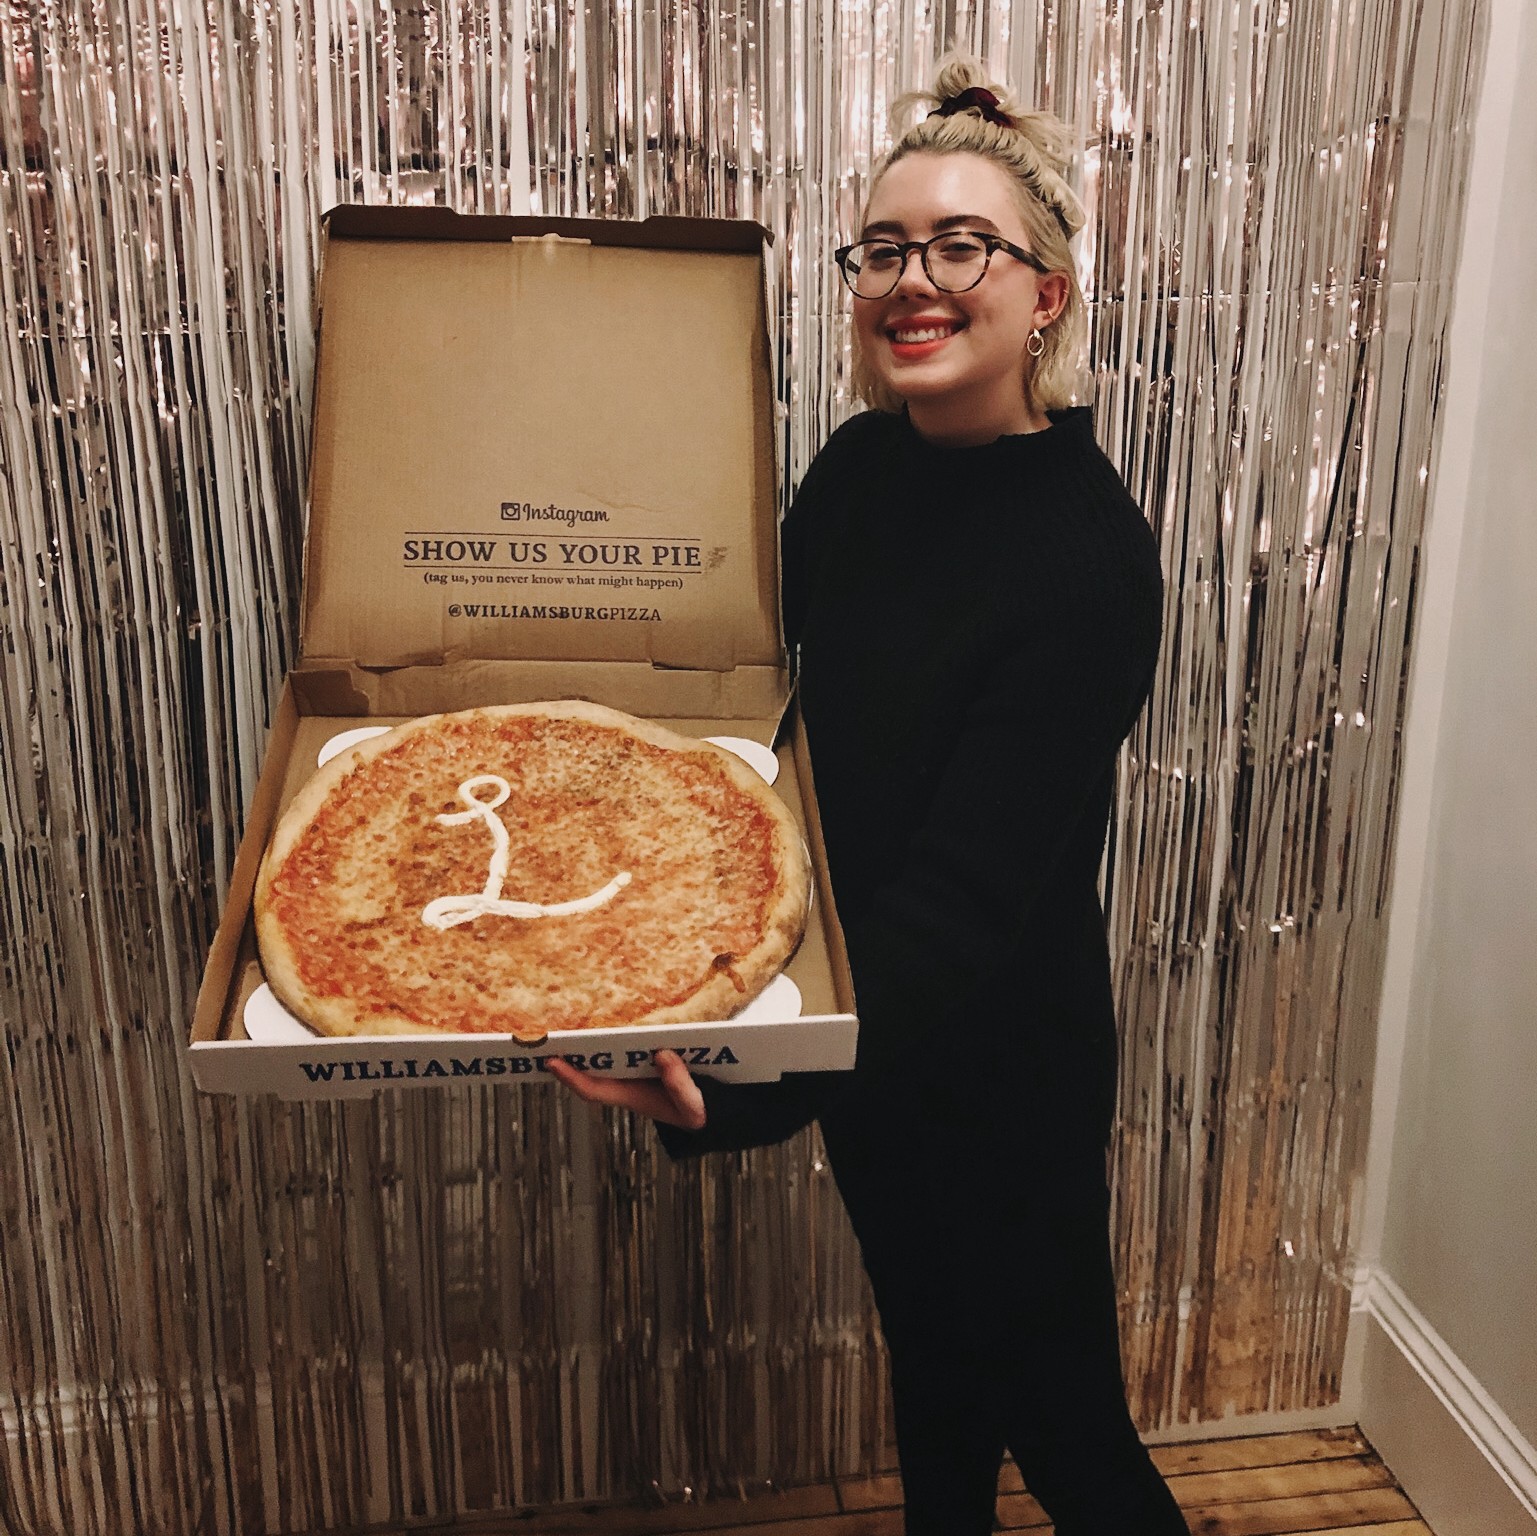 Jillian holding a pizza with the Lickability logo on it.